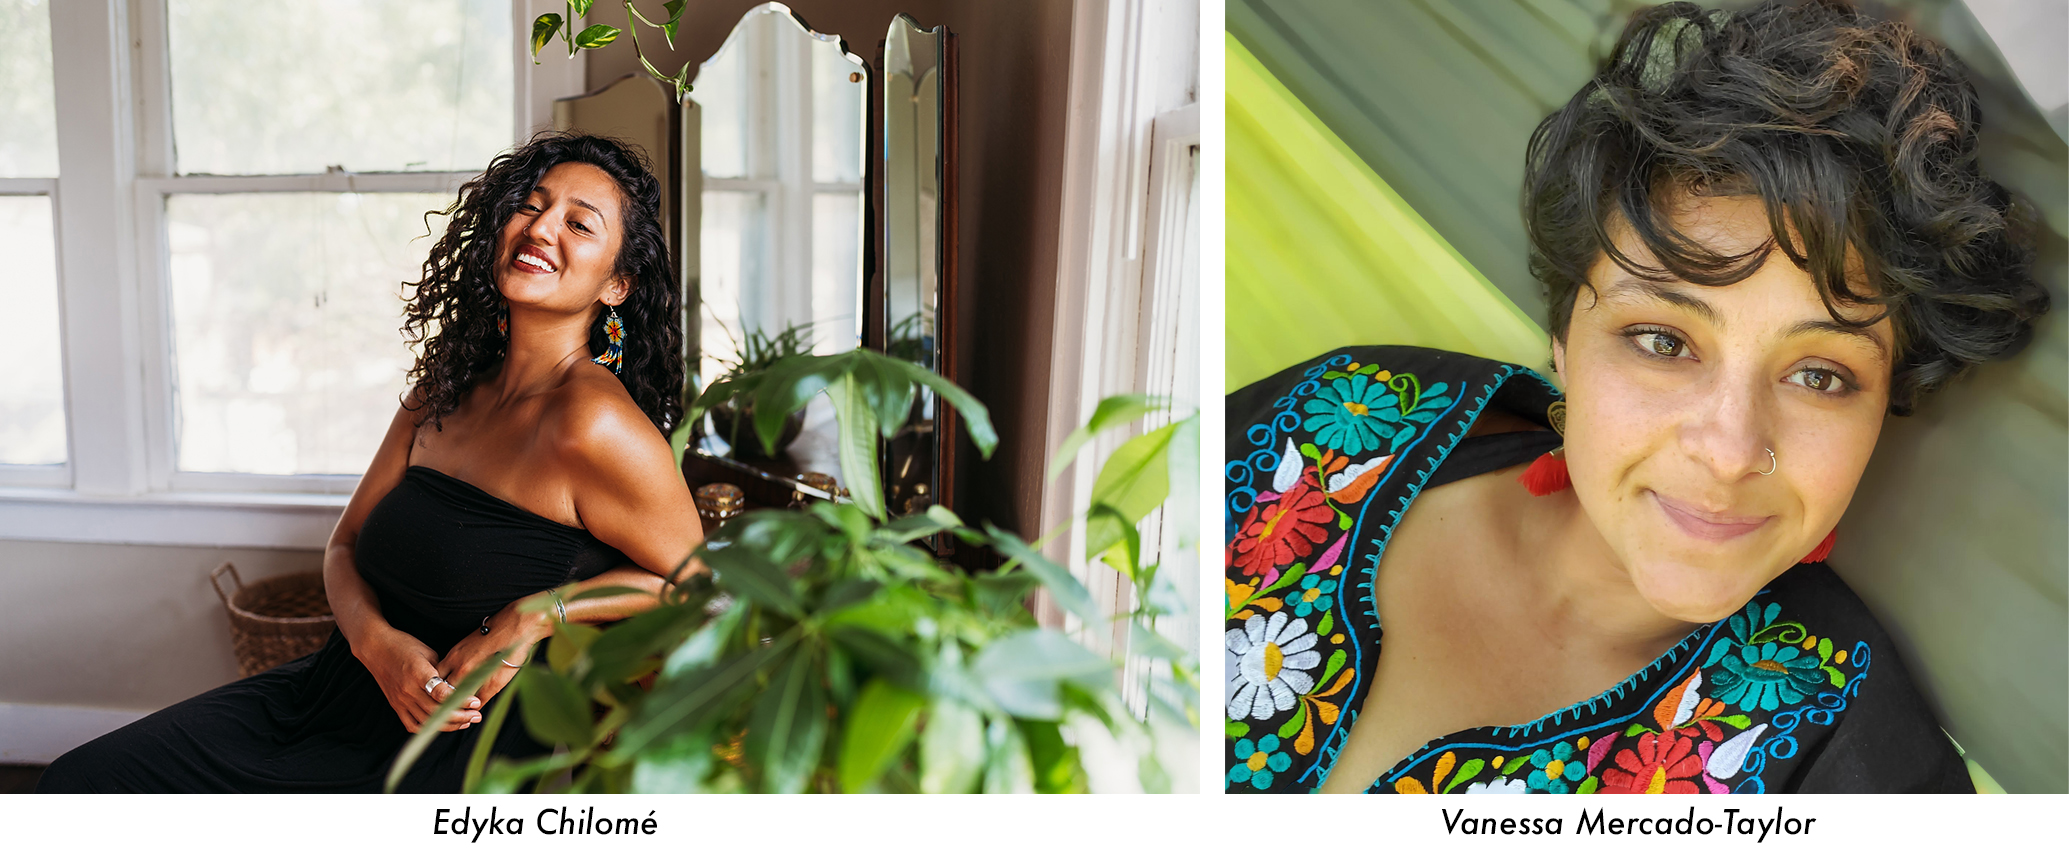 Edyka Chilomé sits smiling among green plants, wearing colorfully beaded earrings and a black dress. Vanessa Mercado Taylor reclines, smiling, wearing a embroidered shirt with a floral pattern and red earrings.